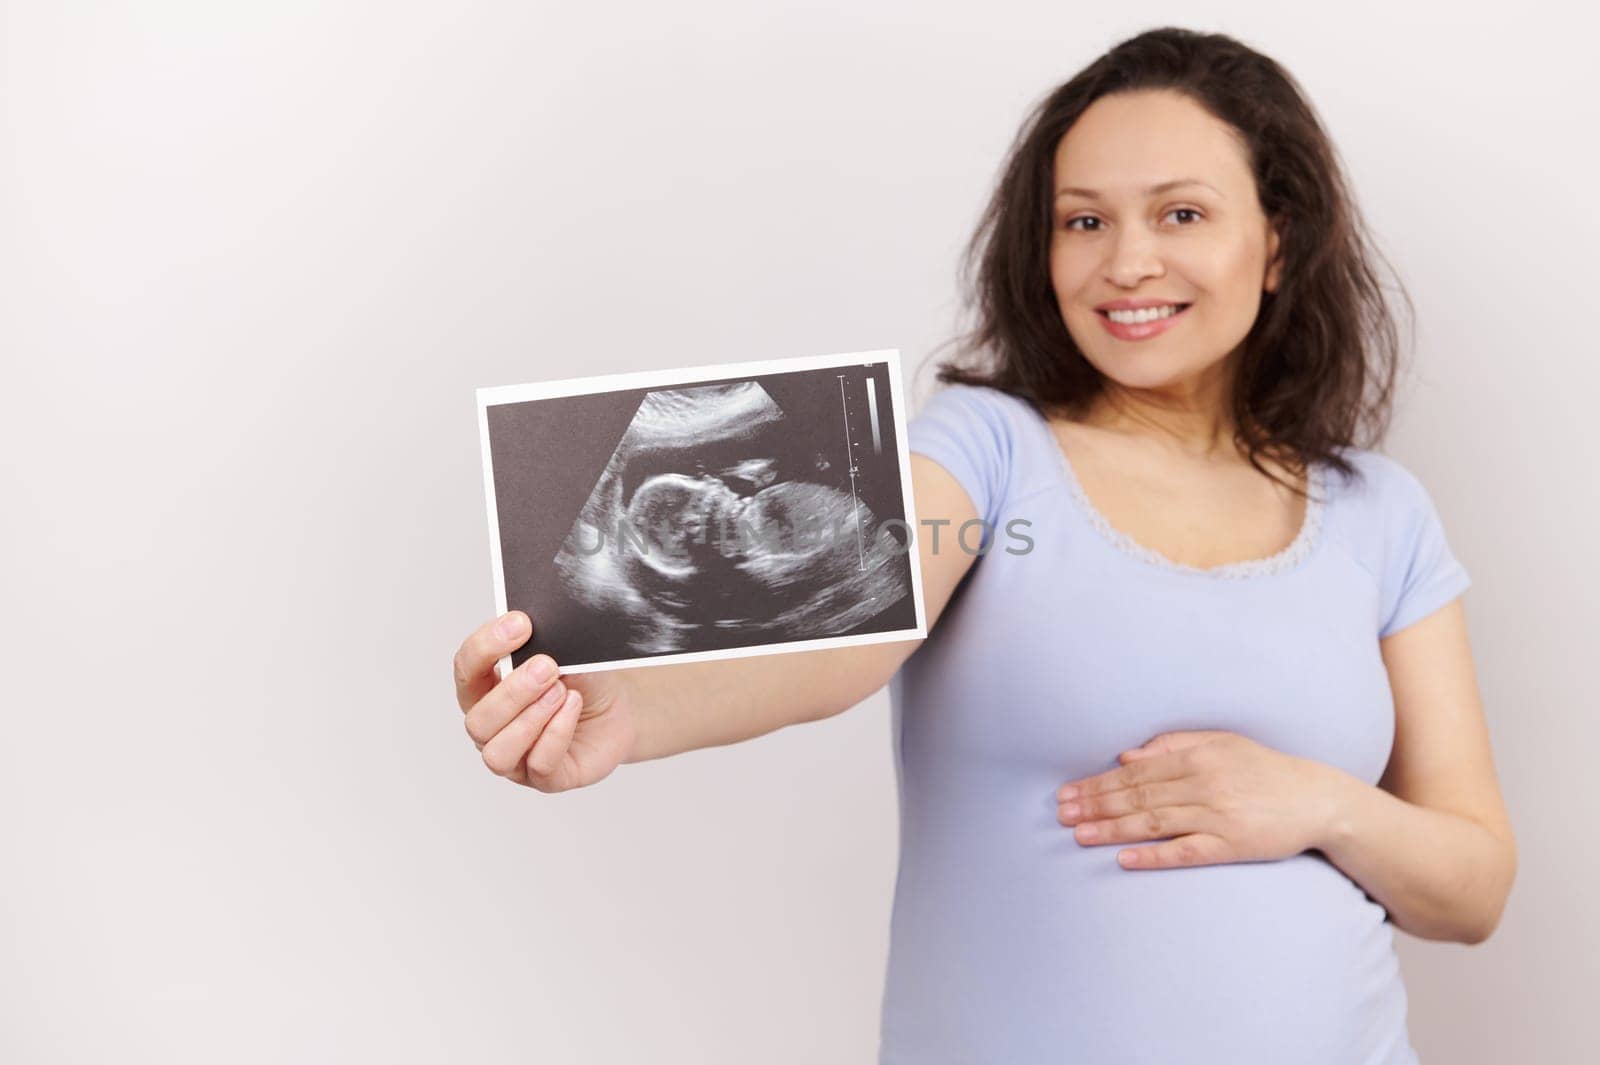 Selective focus on an ultrasound scan image, newborn baby sonography in the hand of a smiling charming pregnant woman, touching her belly, expressing positive emotions, isolated over white background